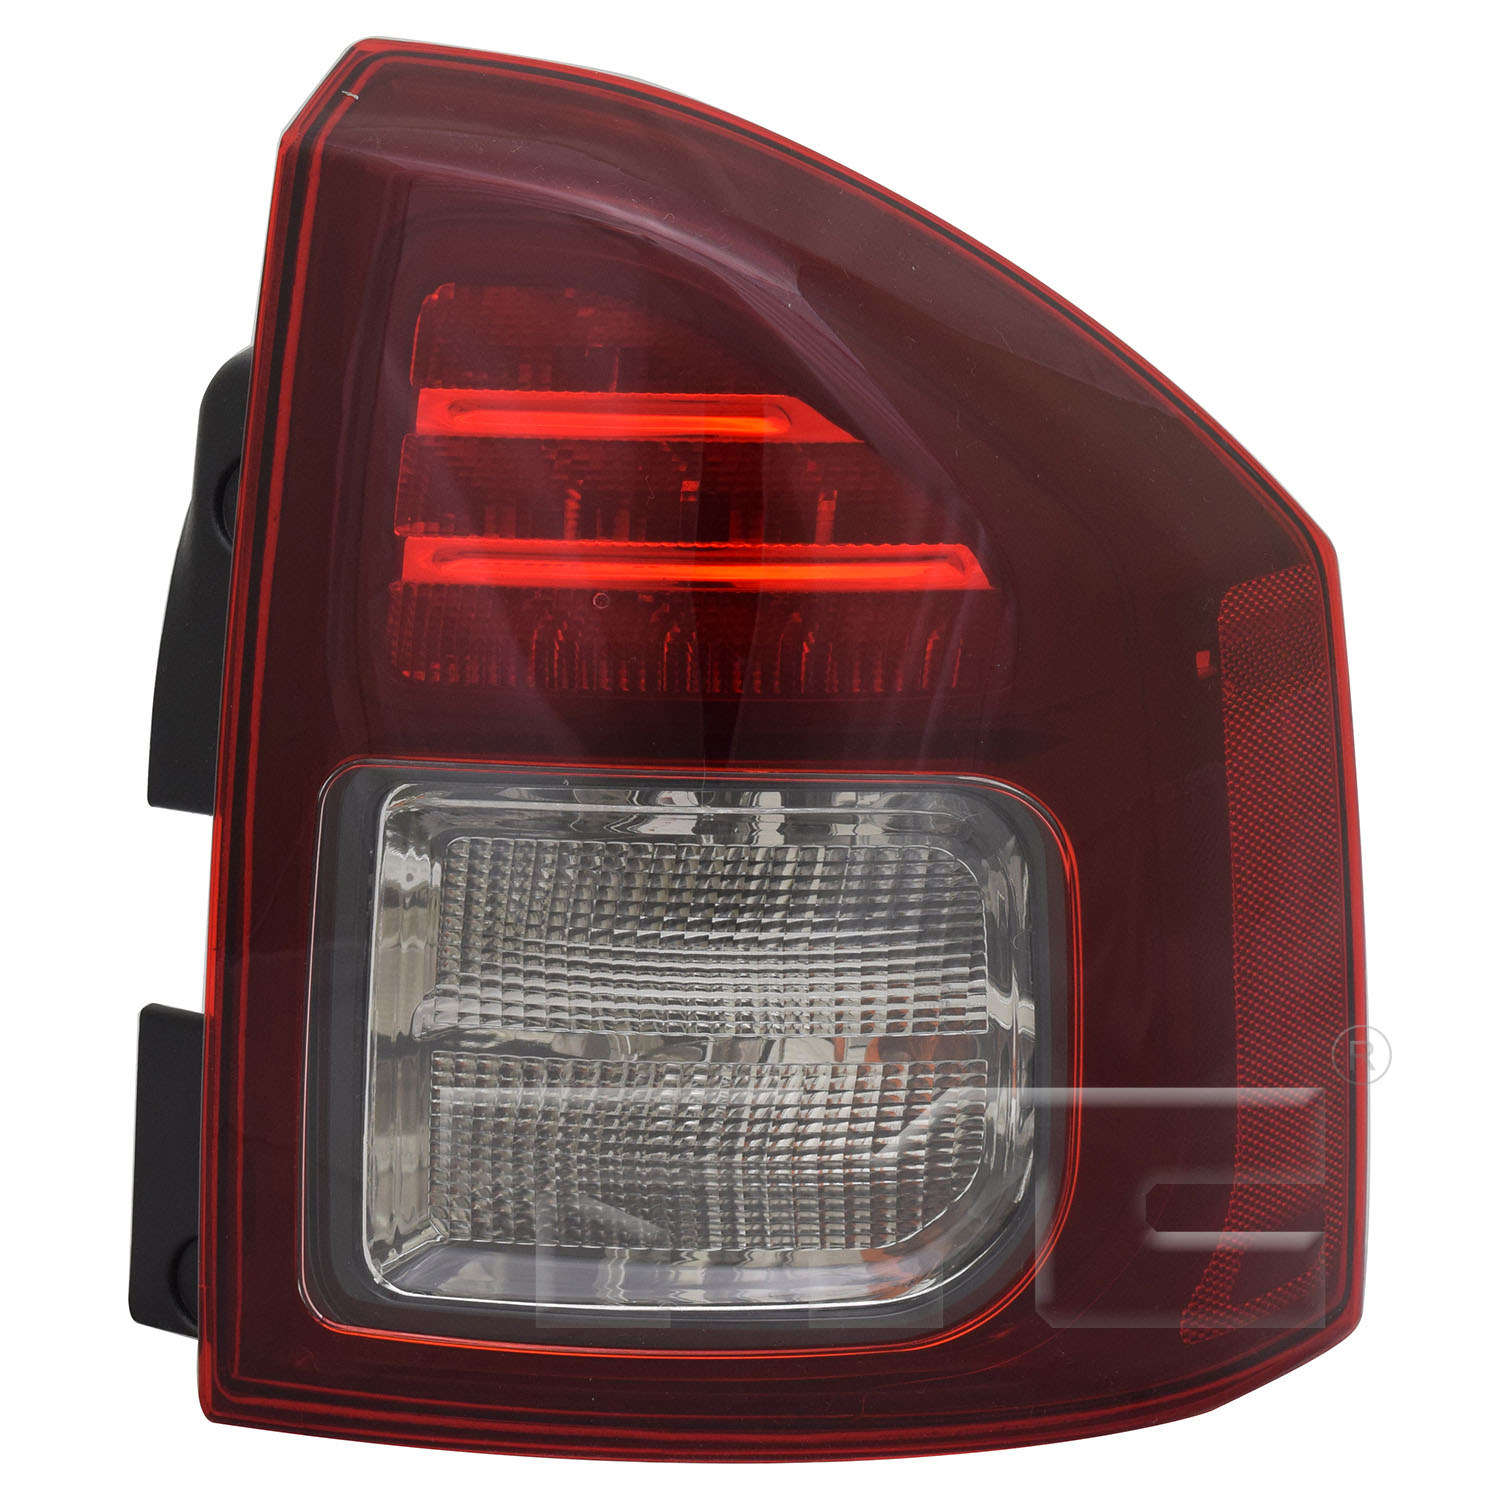 Aftermarket TAILLIGHTS for JEEP - COMPASS, COMPASS,14-17,RT Taillamp assy